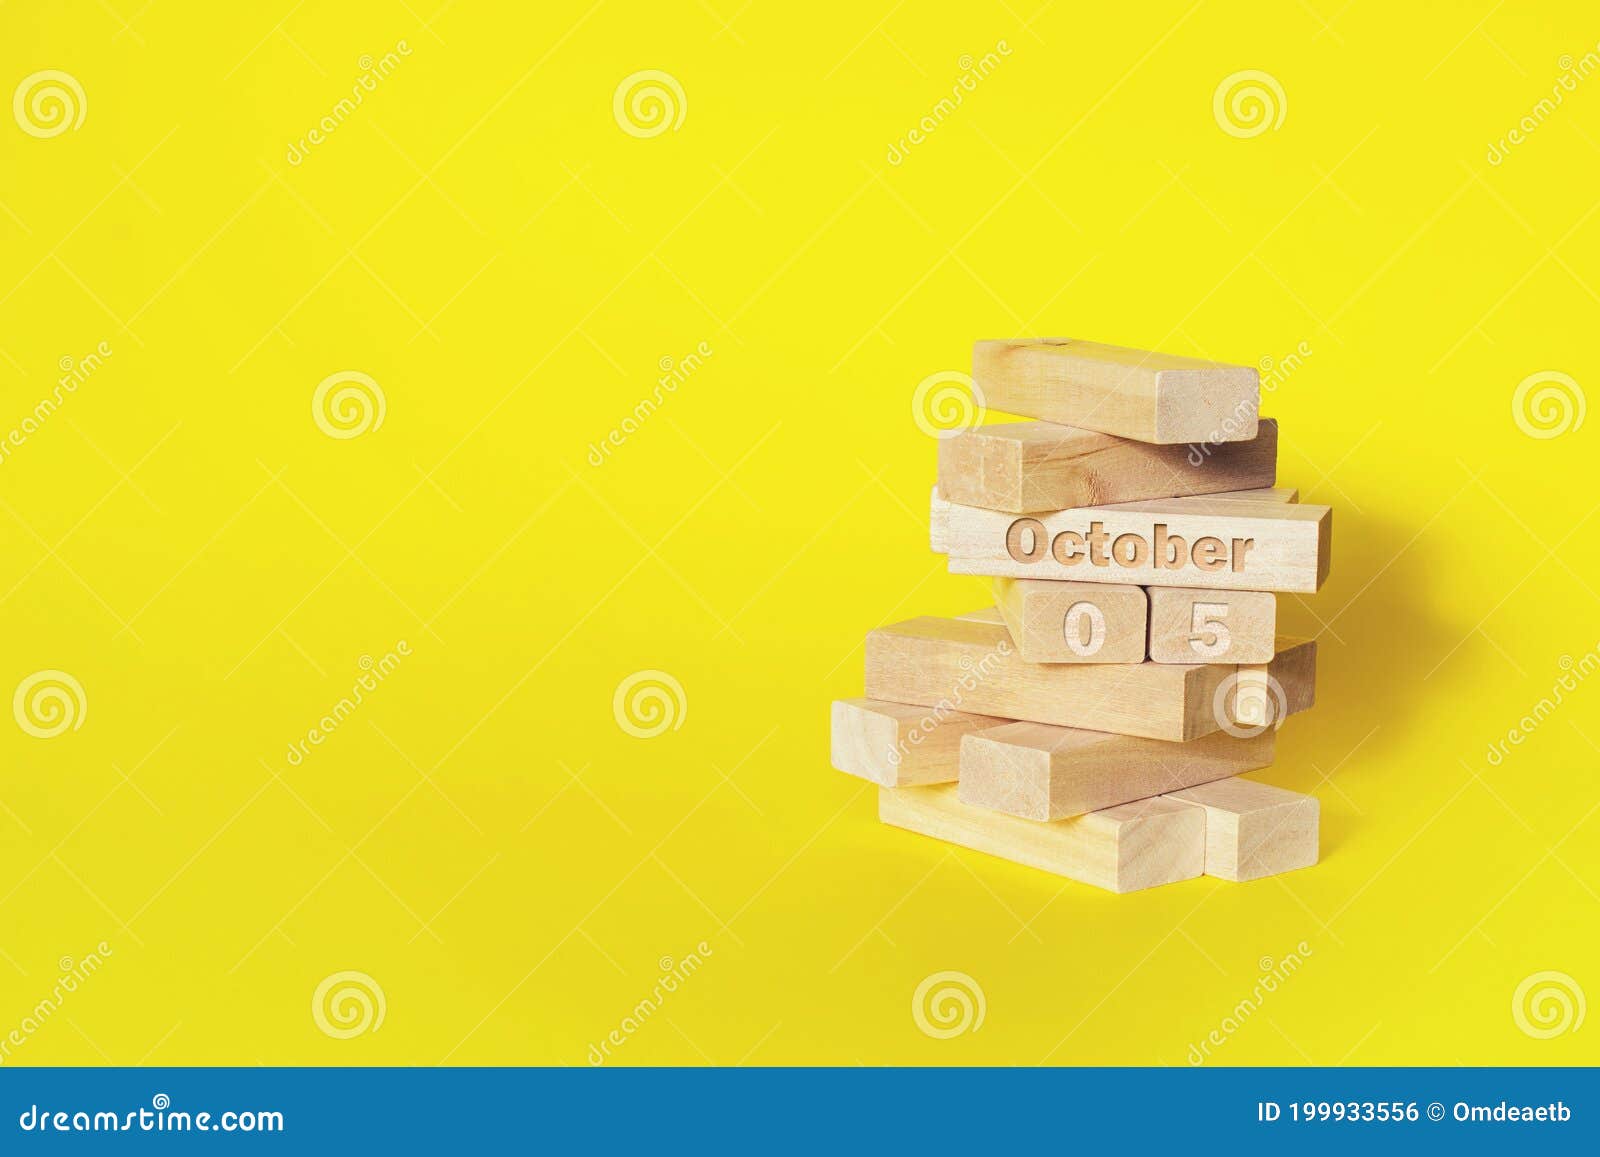 October 5th. Day 5 of Month, Calendar Date Stock Photo Image of diary